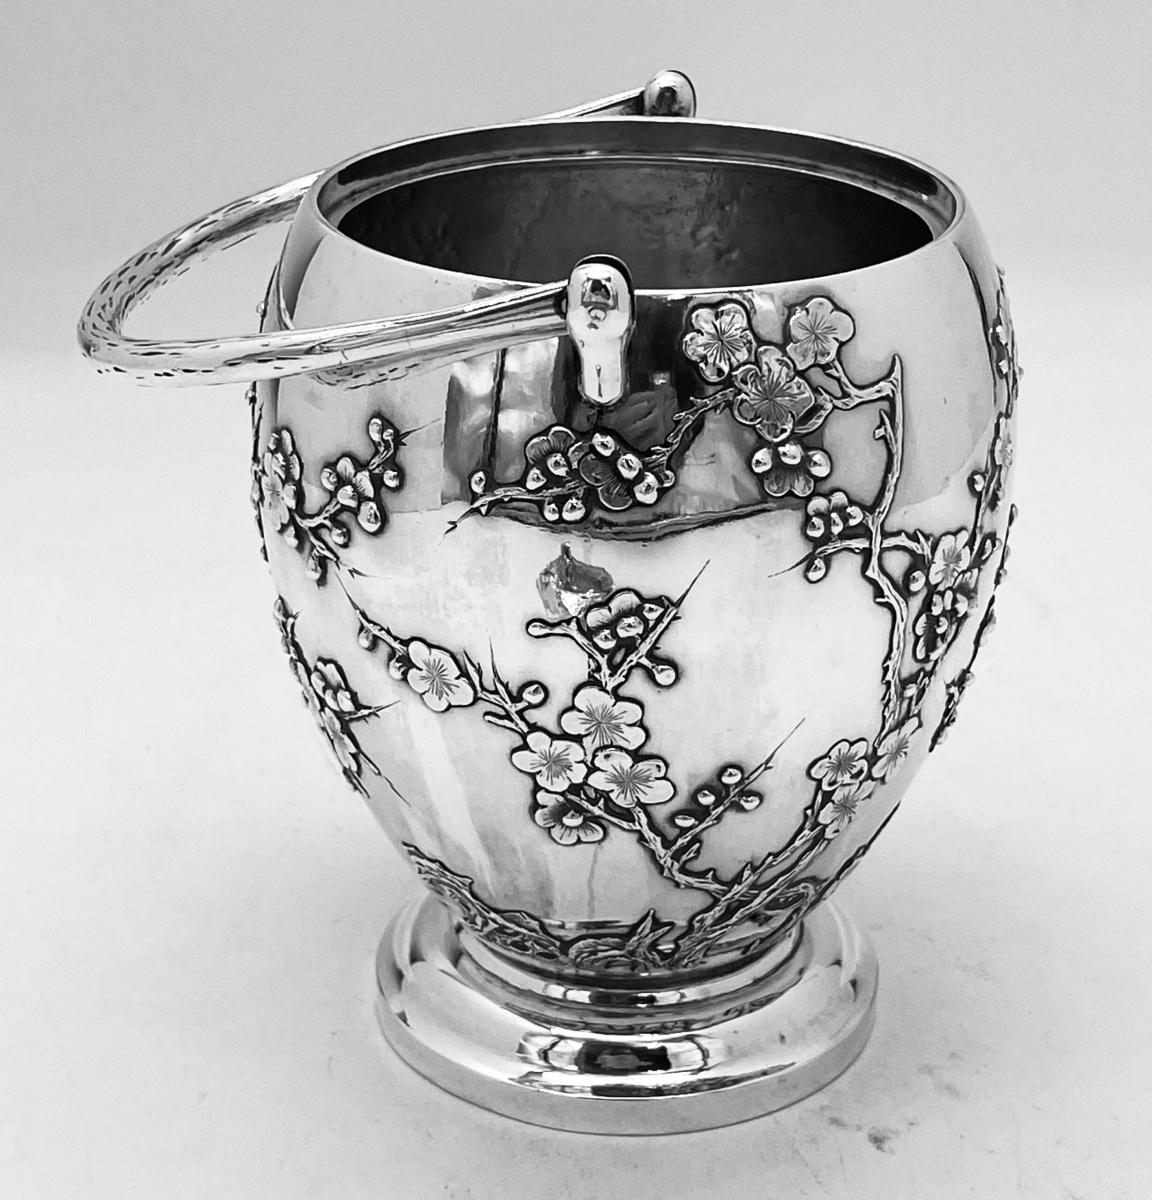 Chinese Export Silver Biscuit Box